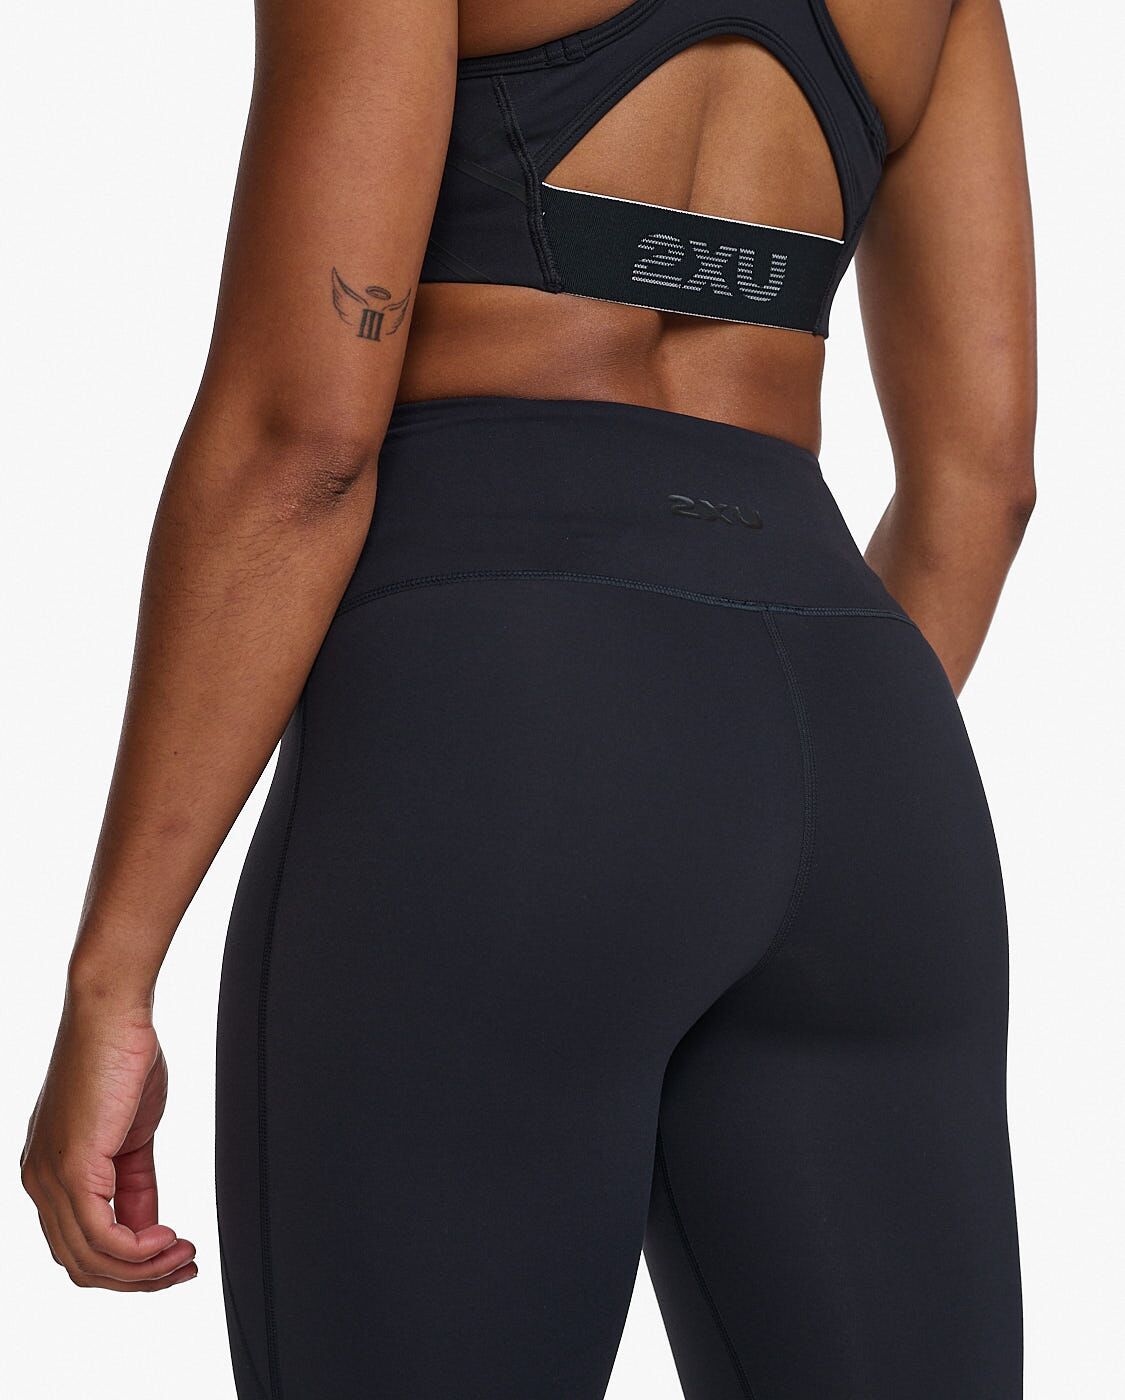 2XU South Africa - Womens Form Hi-Rise Comp 3/4 Tight - BLK/BLK